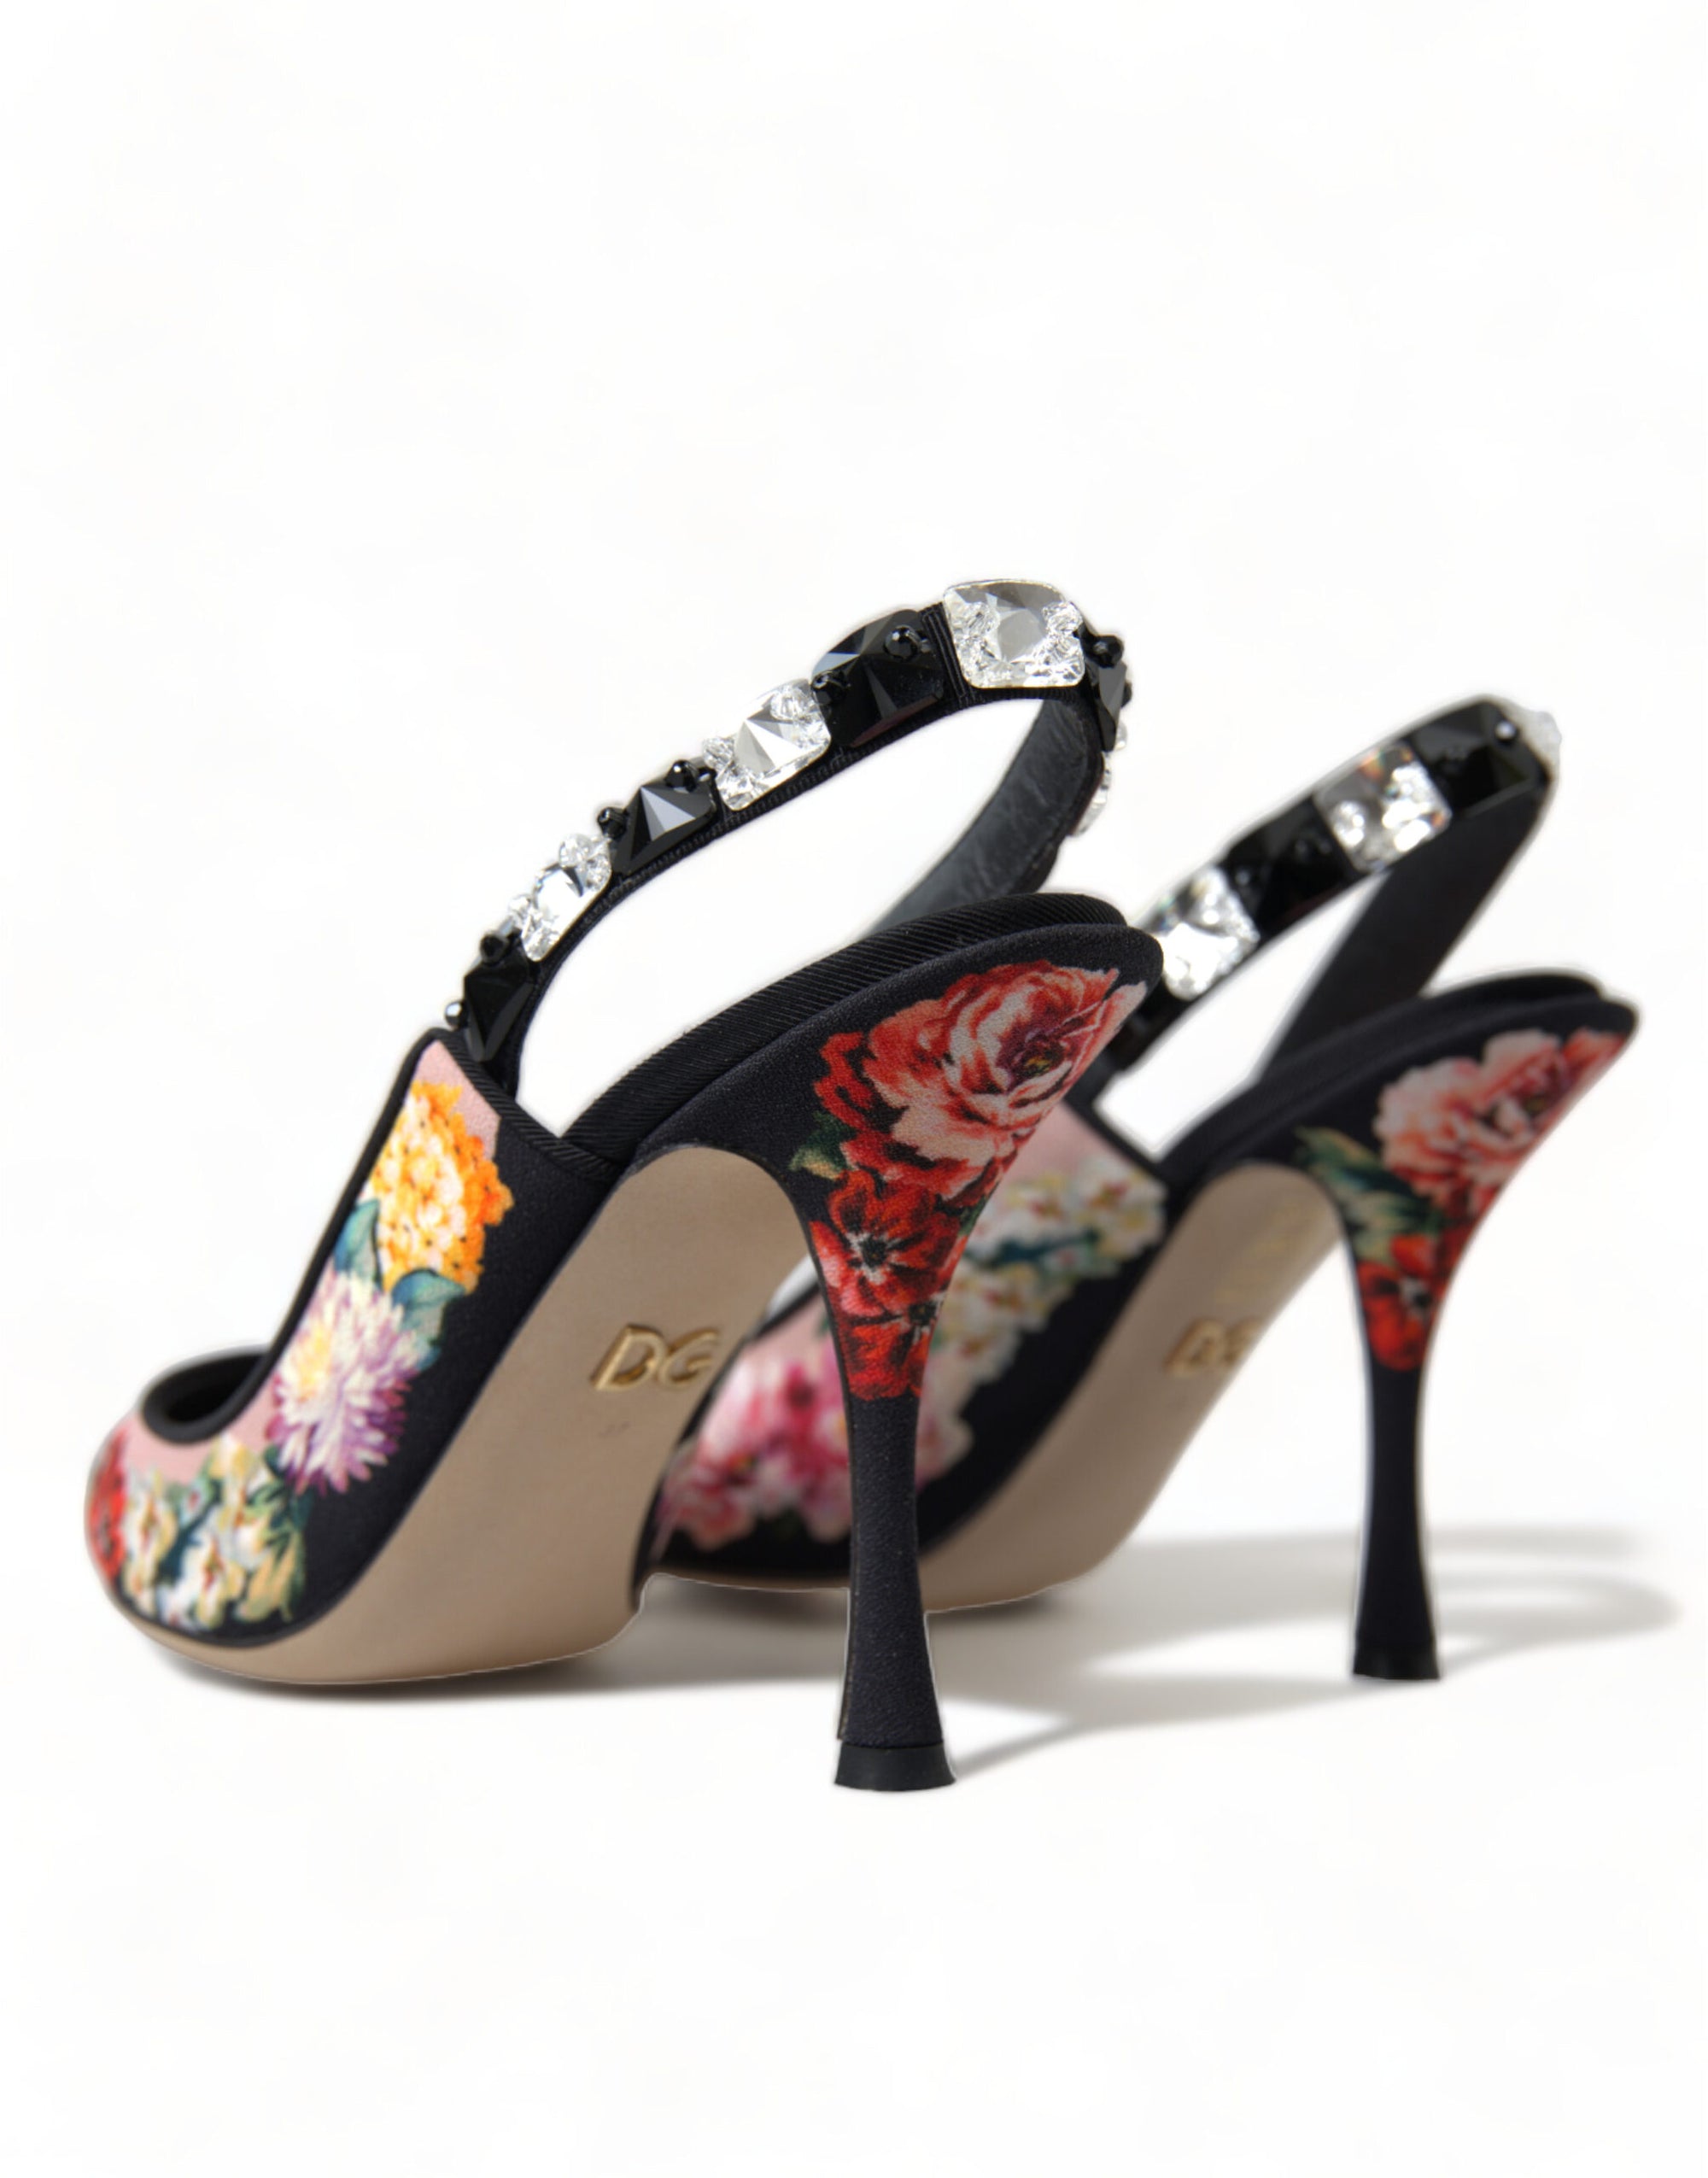 Floral Slingback Heels with Luxe Crystal Details